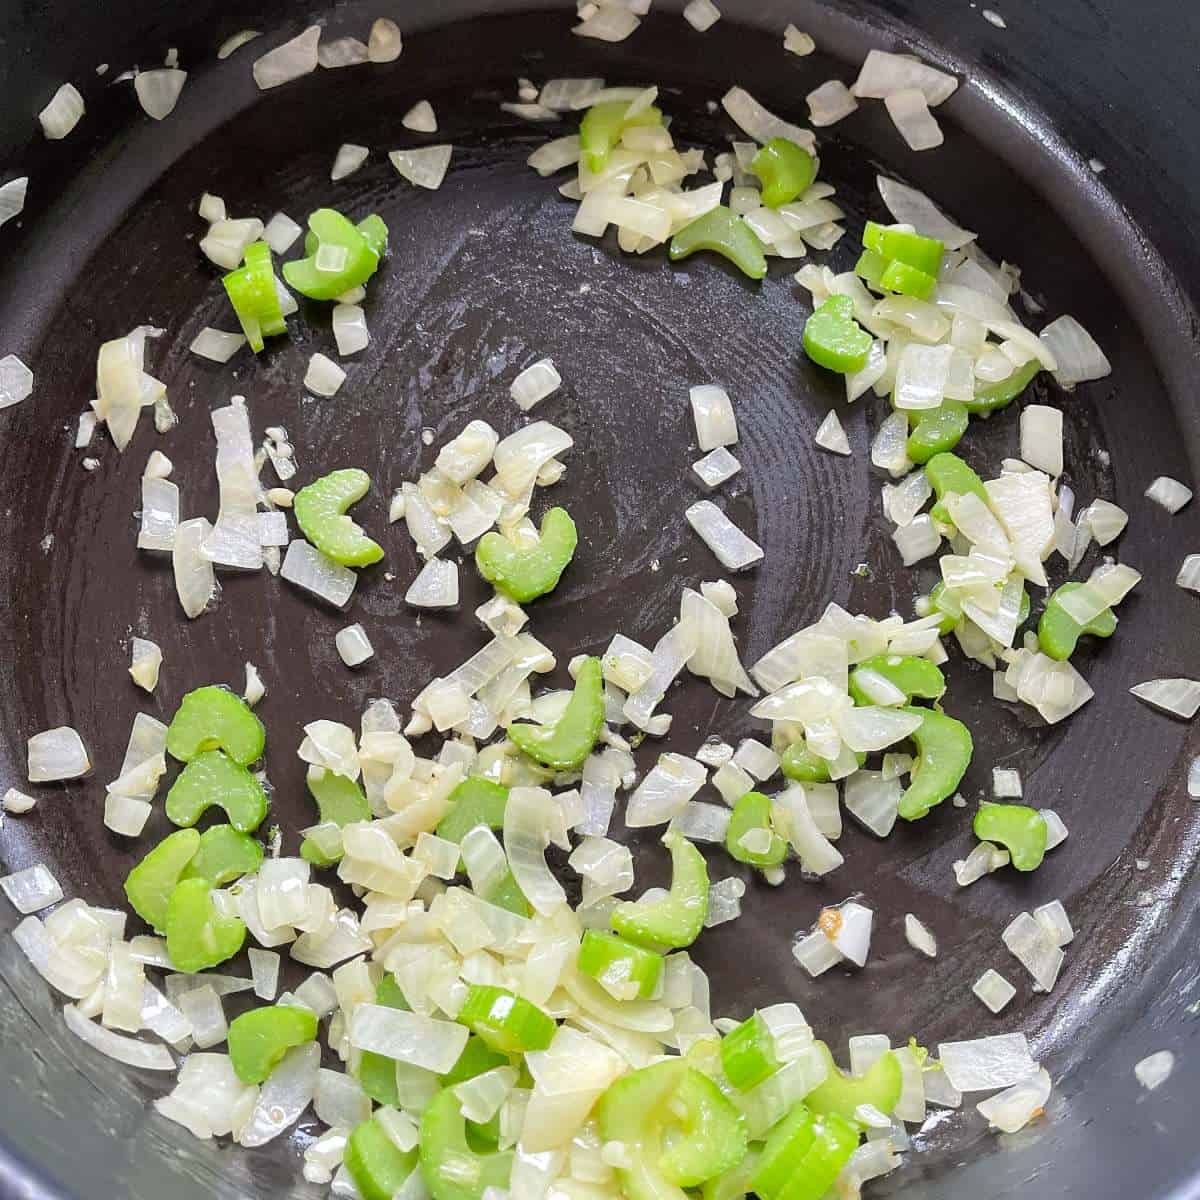 Chopped onions, garlic and celery frying in a frypan